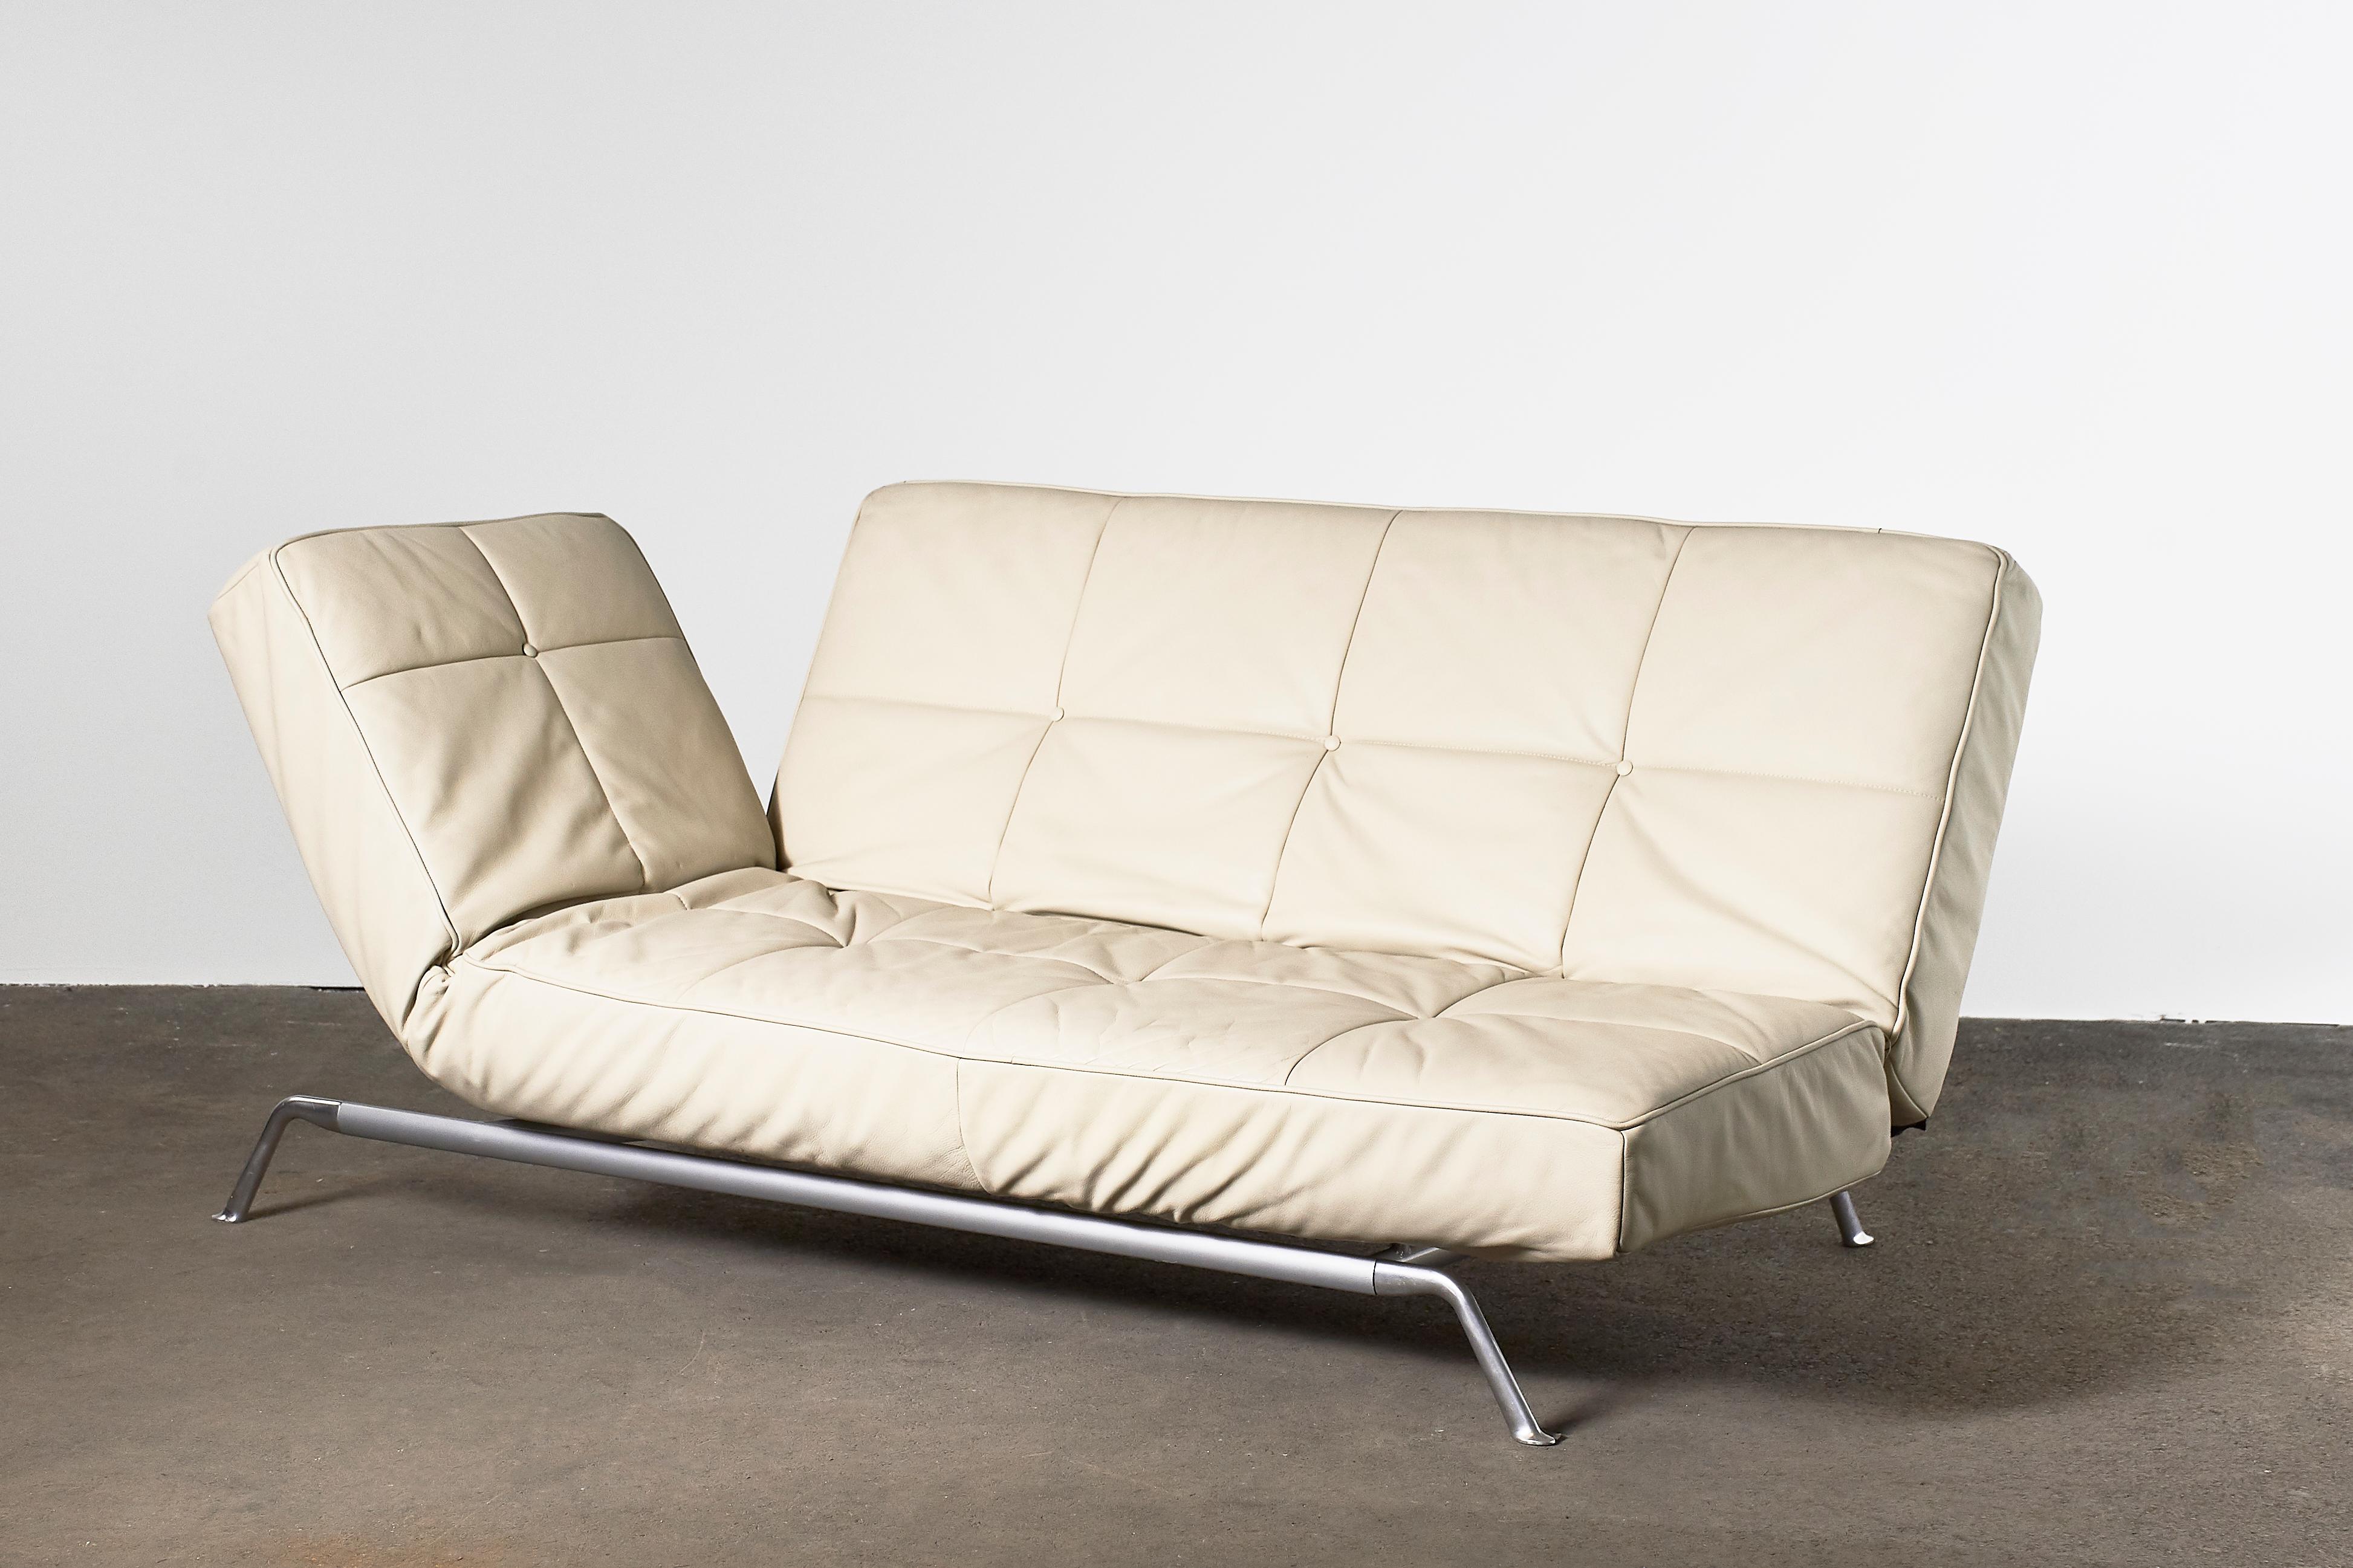 Mid-Century Modern Smala by Ligne Roset Adjustable Daybed Sofa in Beige Leather with Pillow